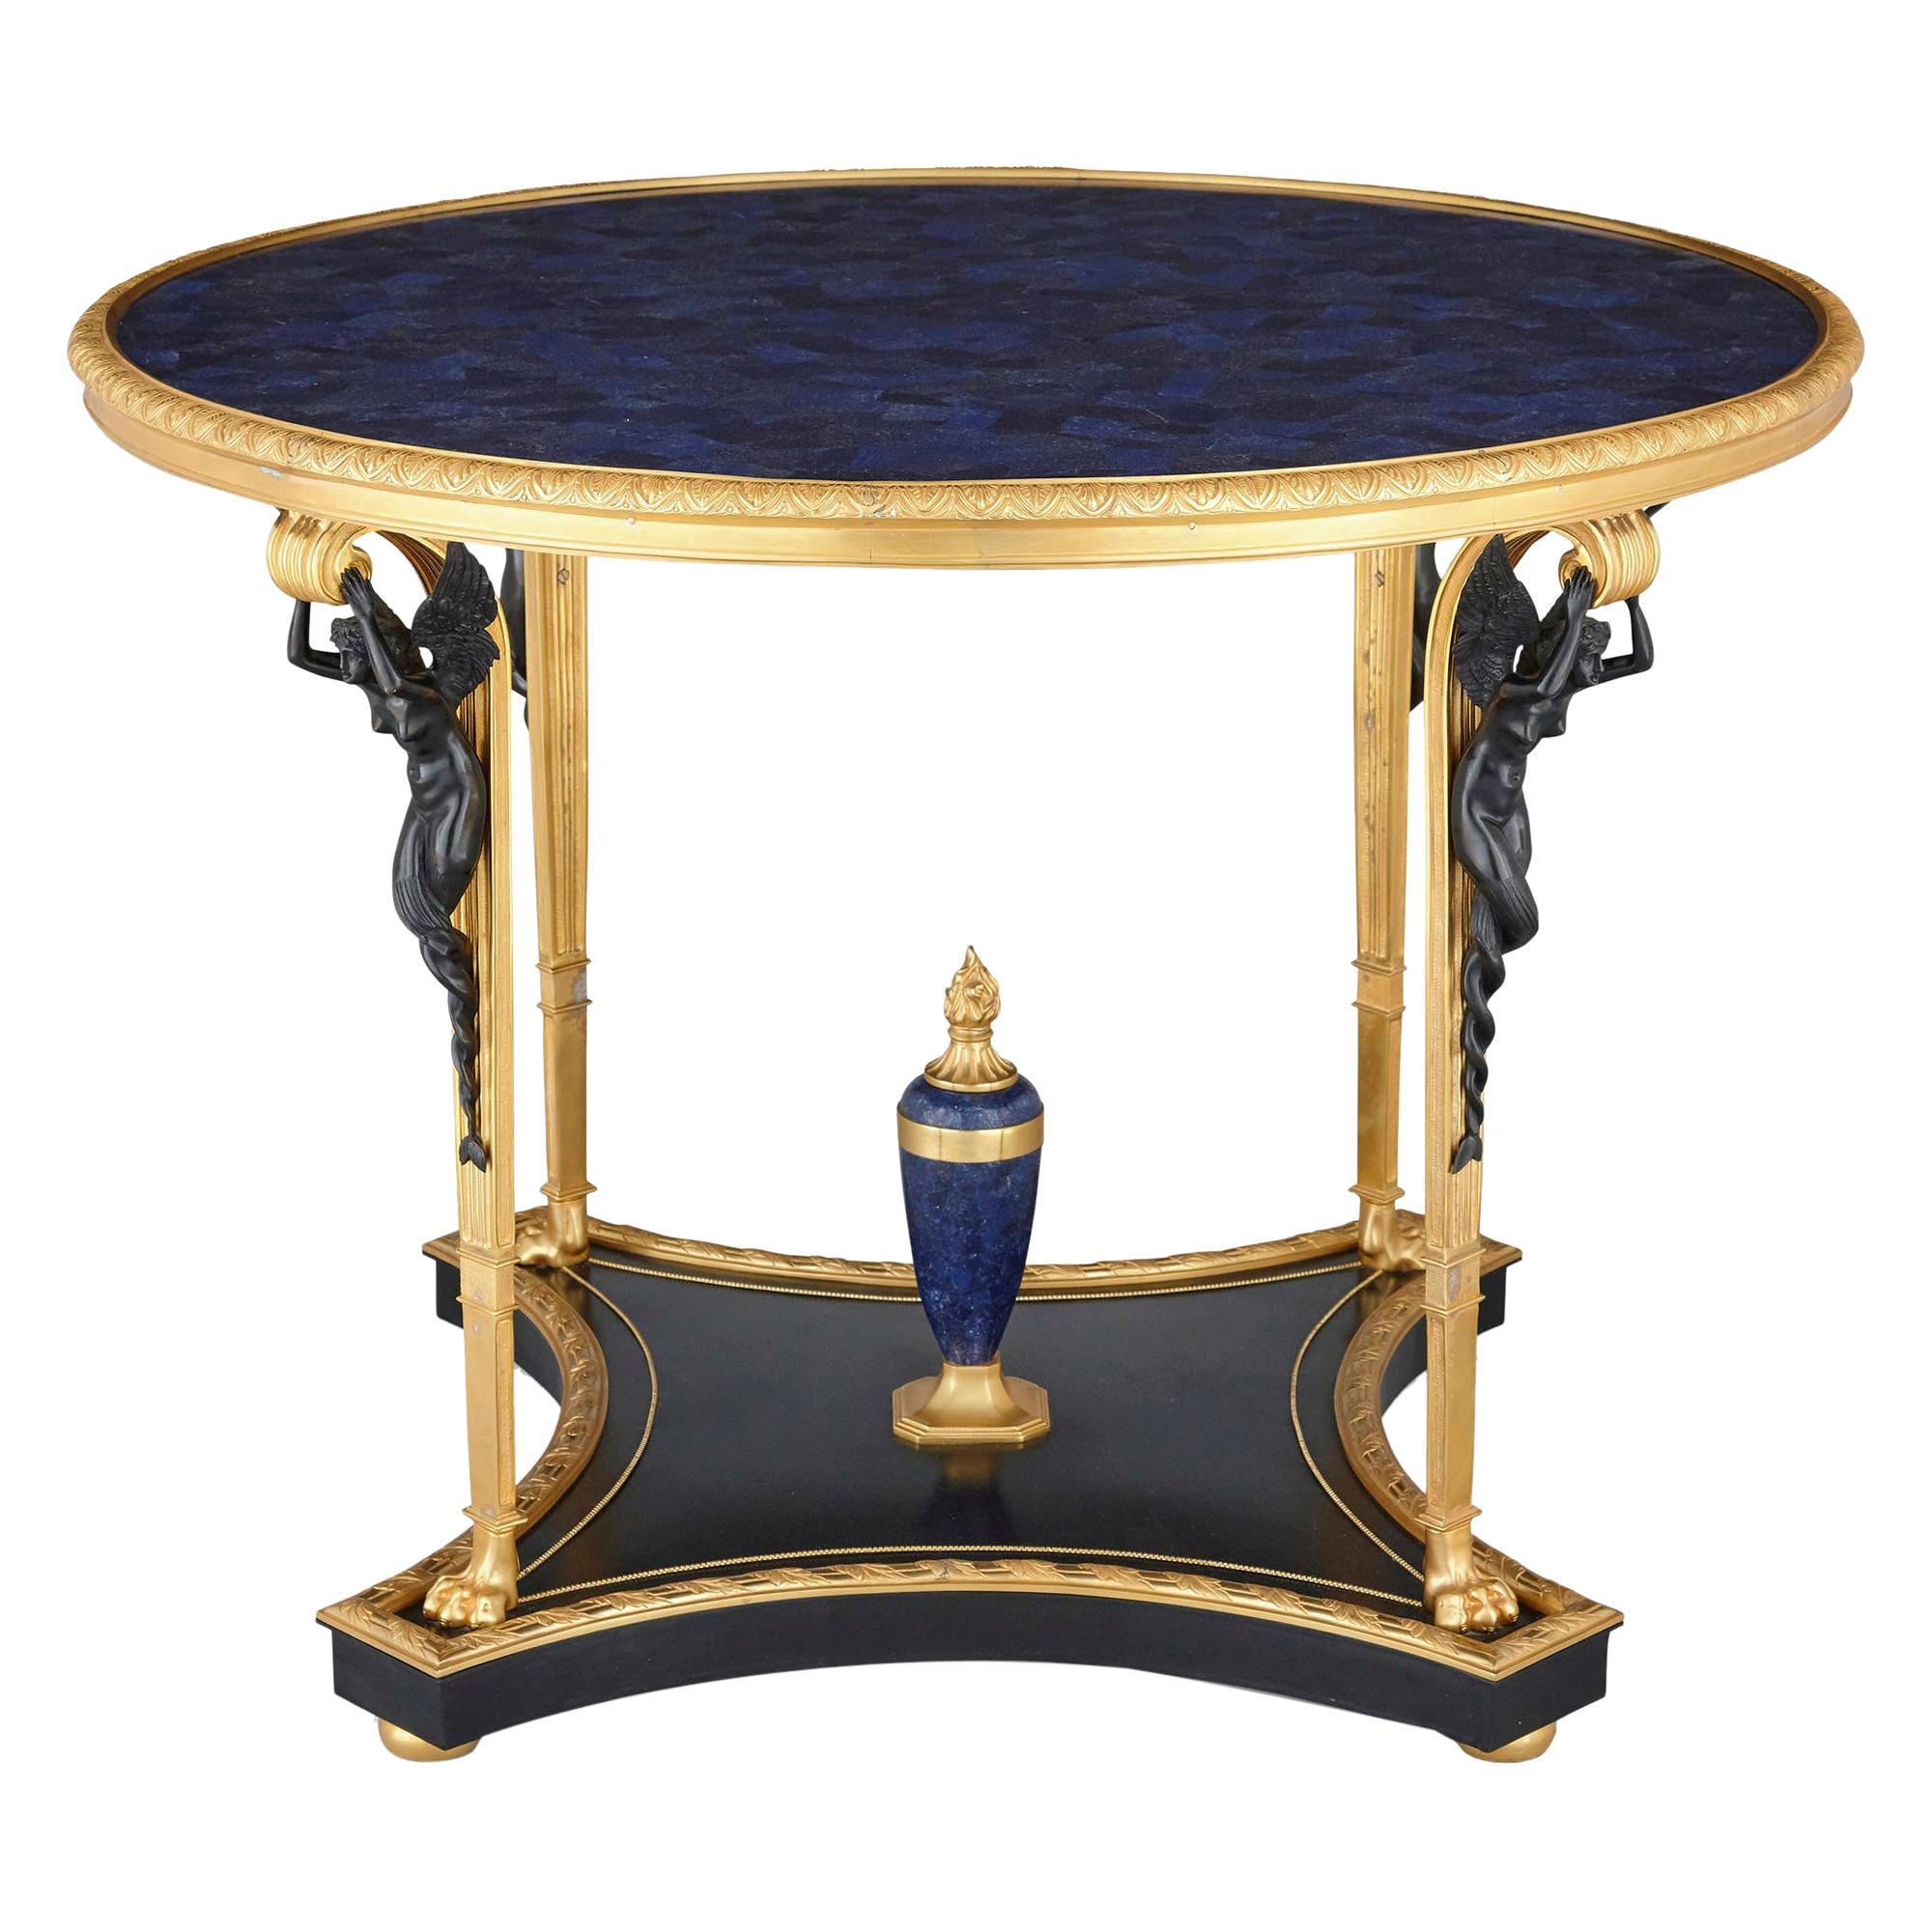 Neoclassical Empire Style Ormolu and Lapis Lazuli Table For Sale